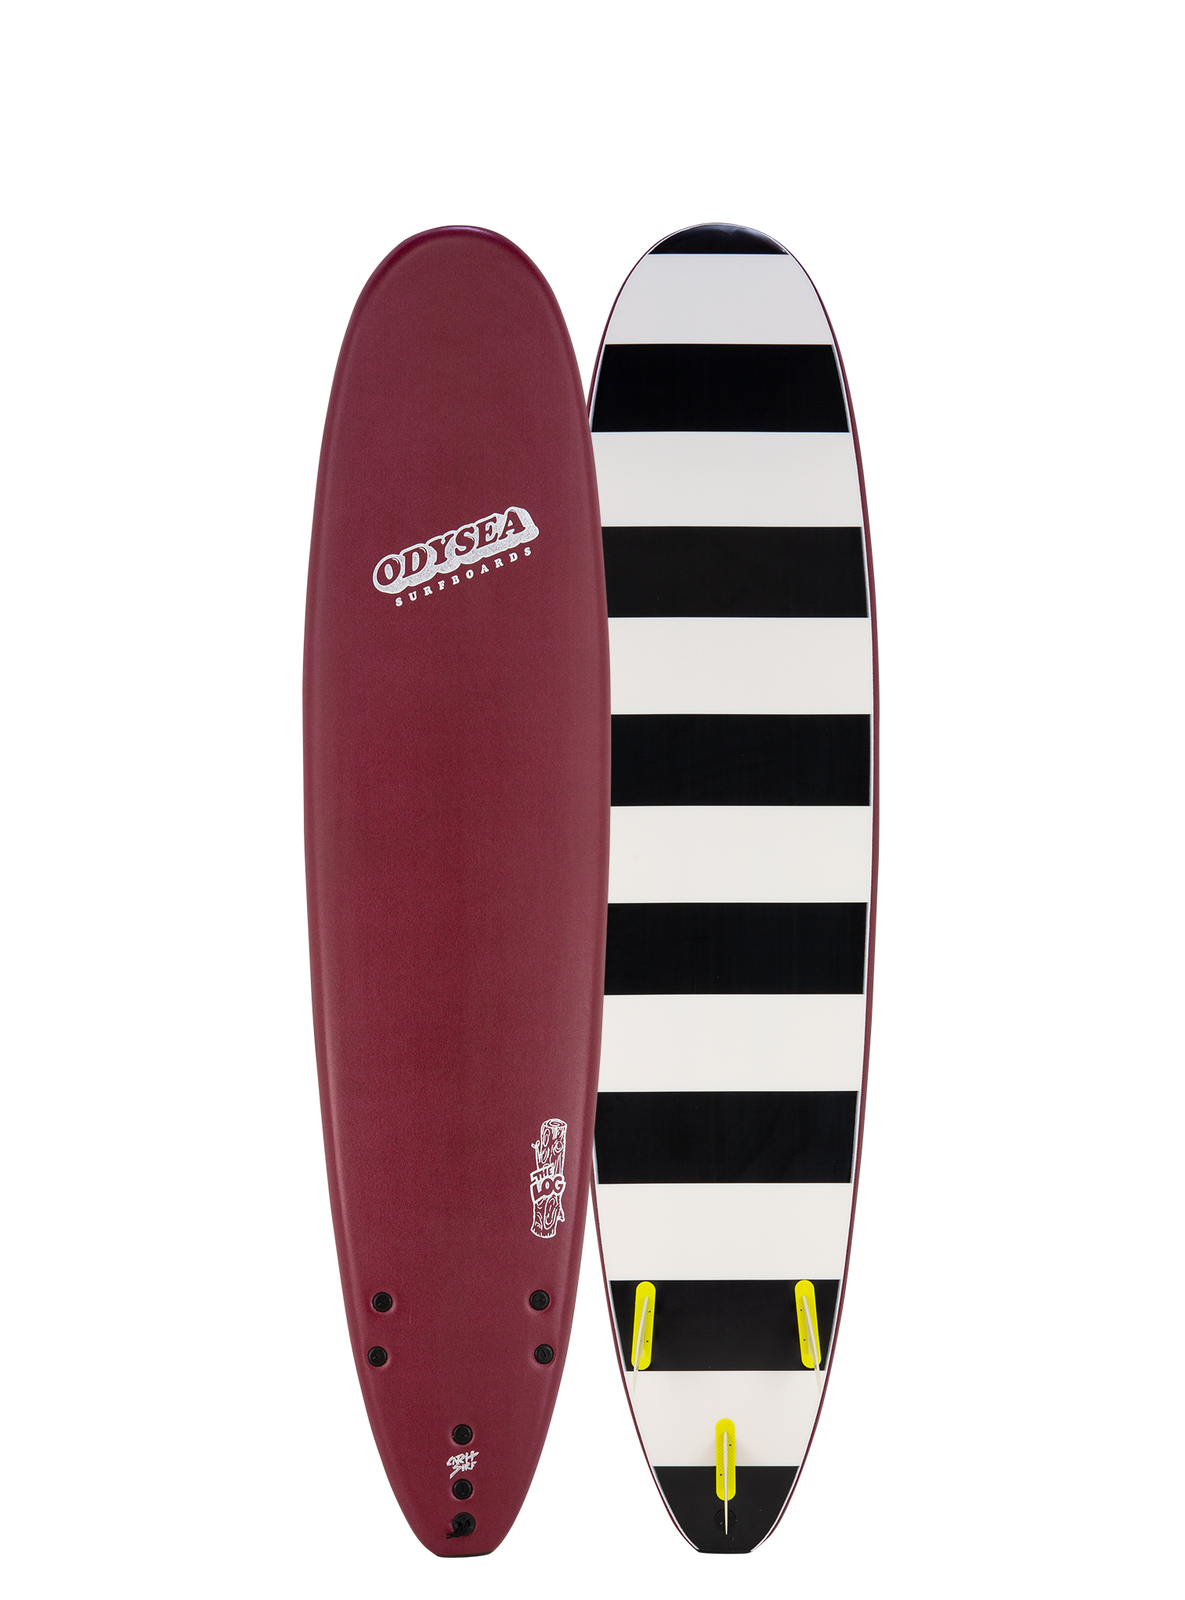 Catch Surf Log 8'0 Tri Fin. This surfboard is suitable for 